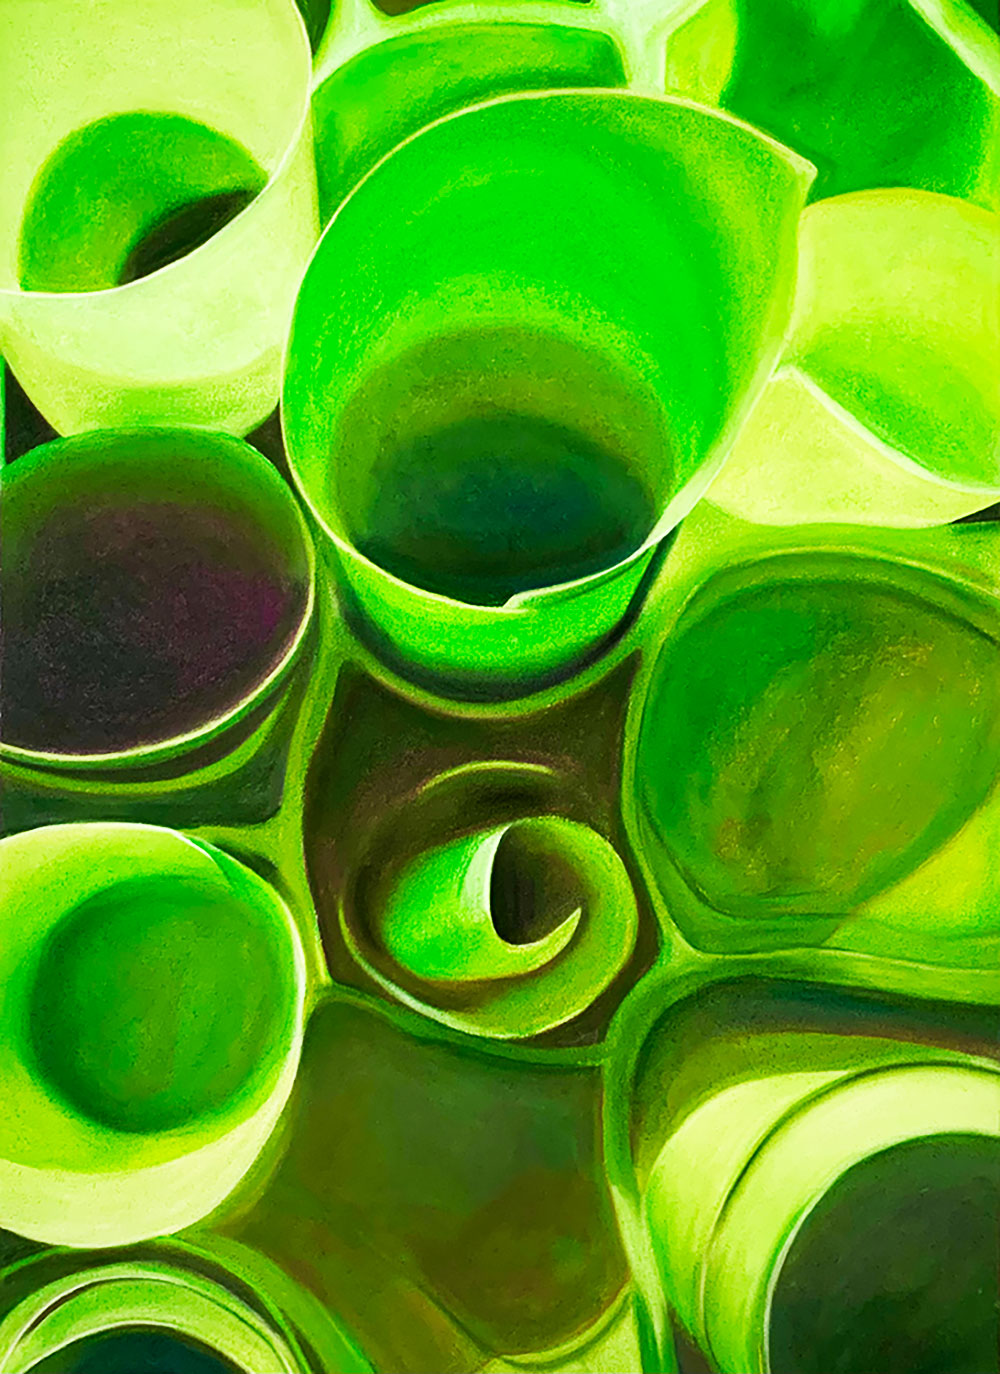 A colored drawing of several ends of rolled up paper in the color lime green